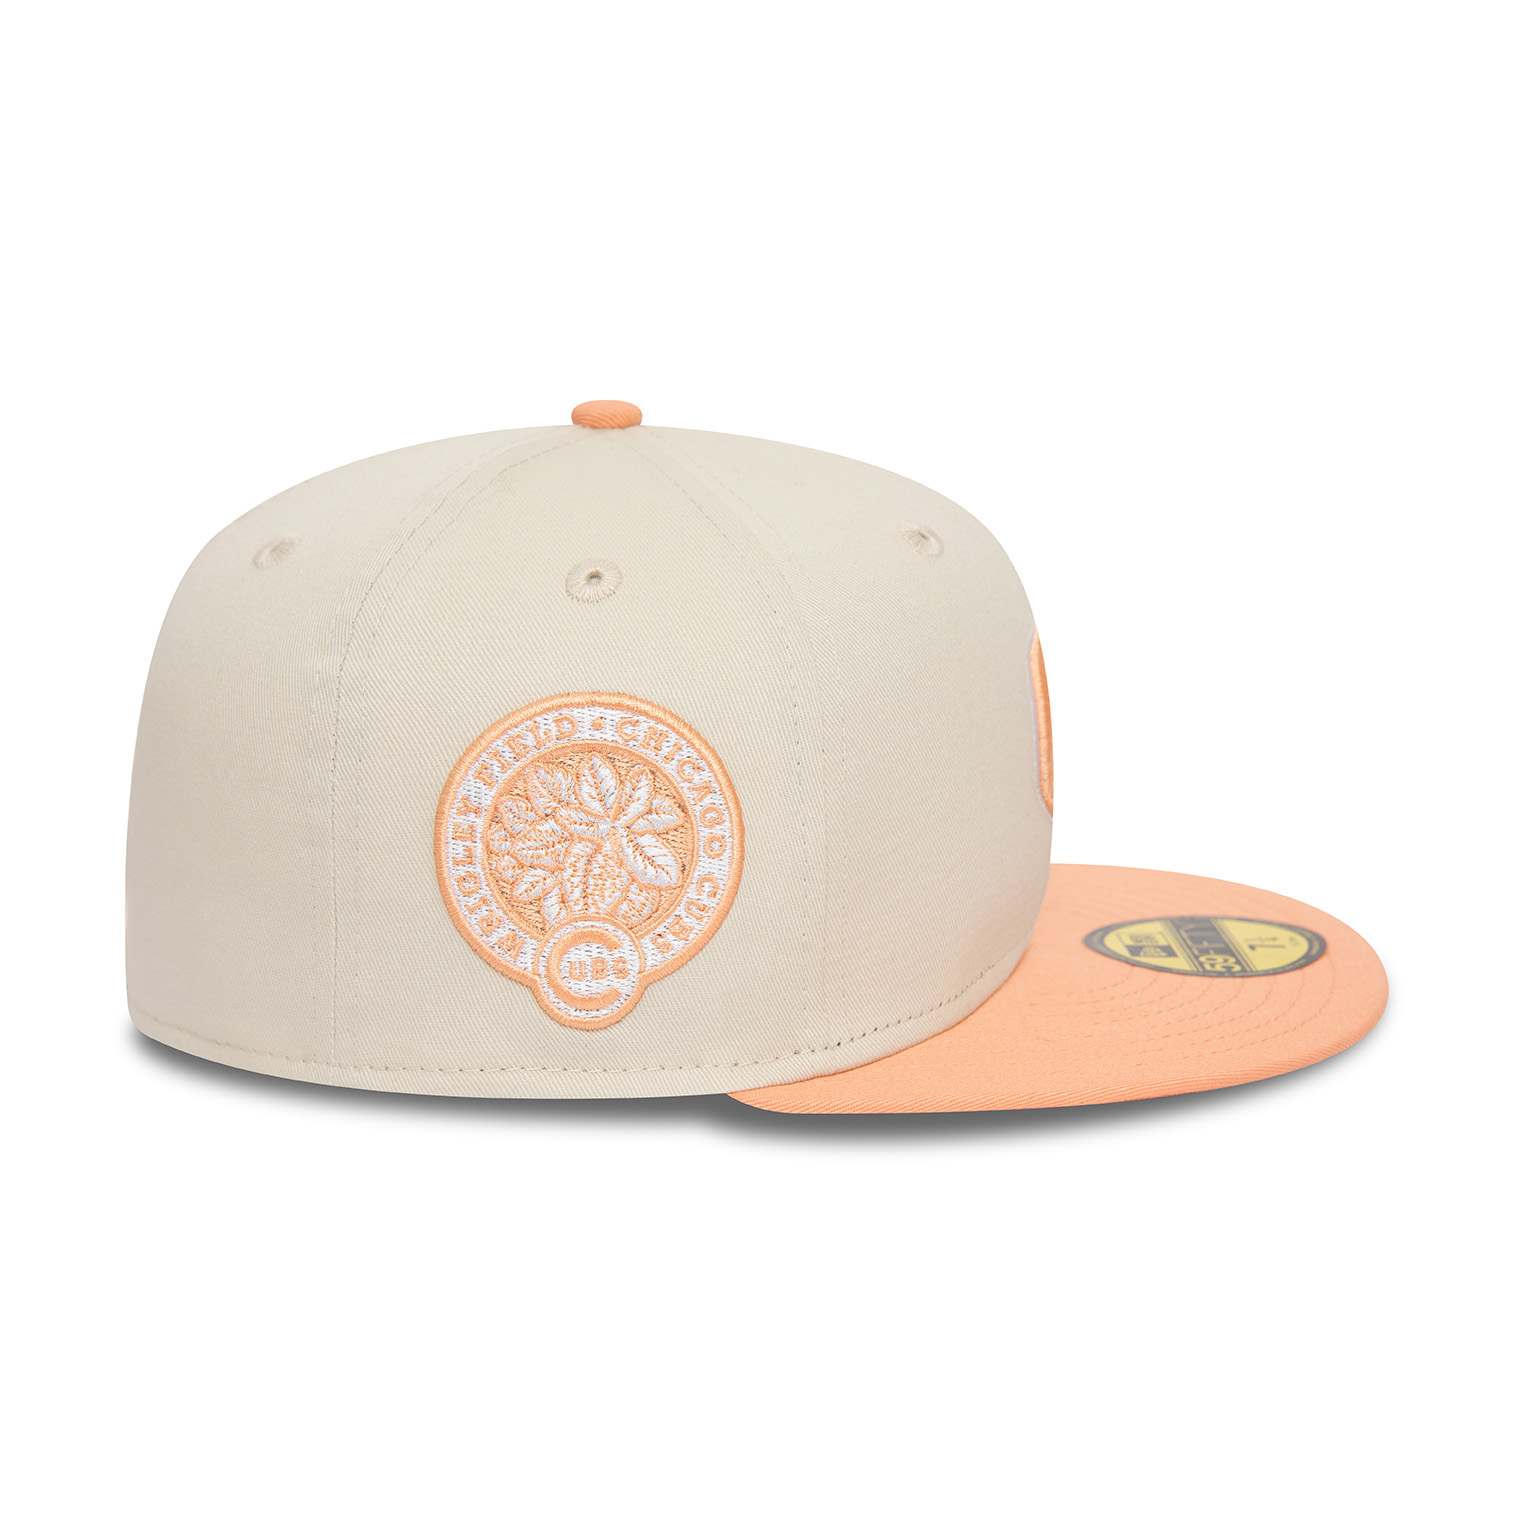 New Era White Crown 59Fifty Cap Chicago Cubs Beige Rose